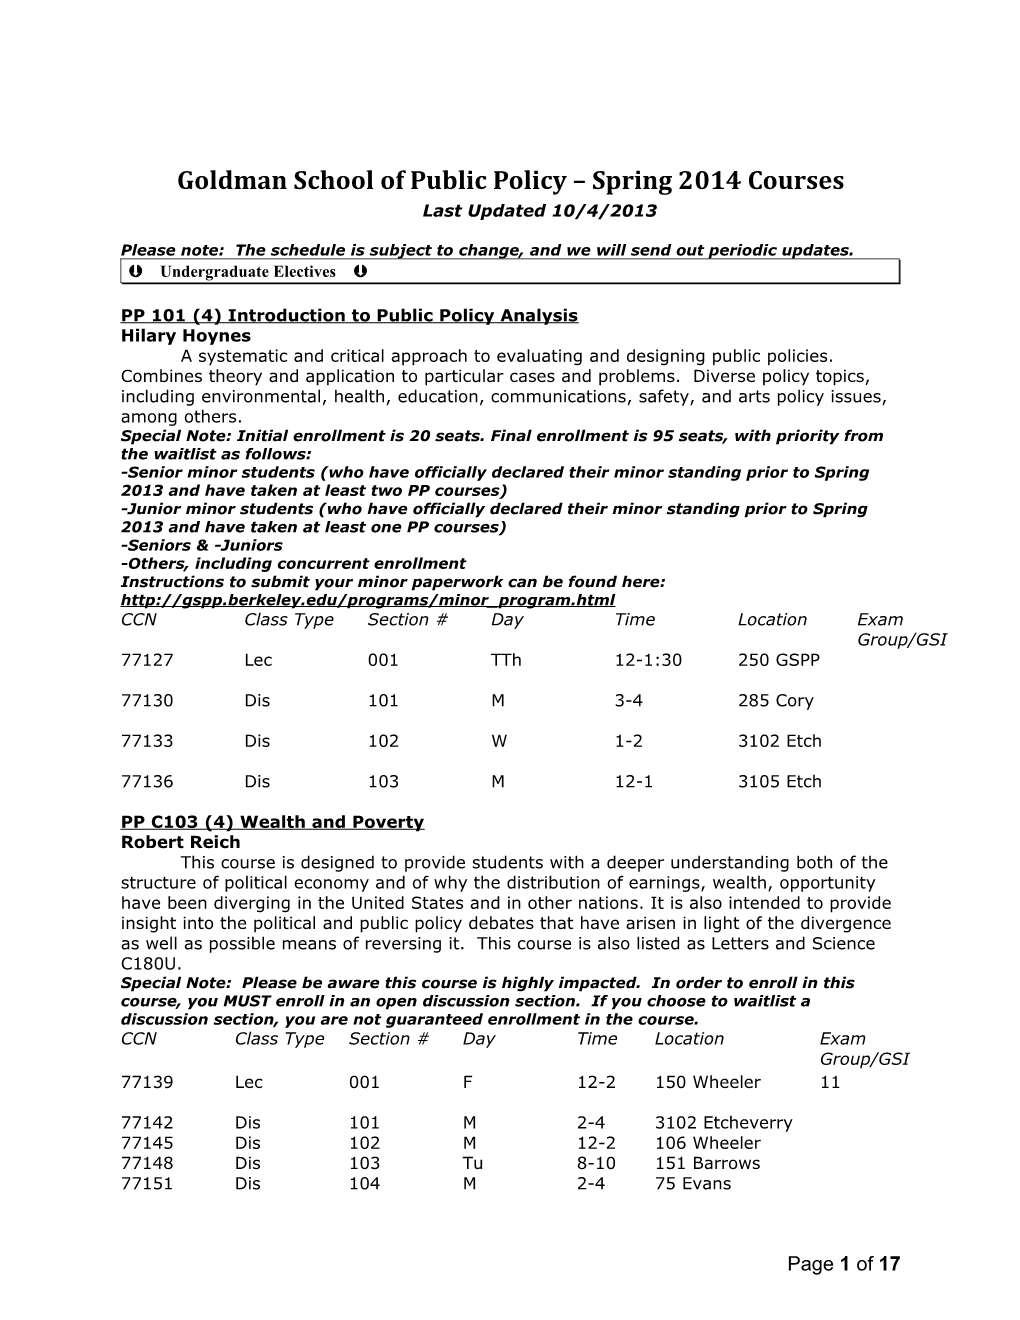 Goldman School of Public Policy - Spring 2008 Courses